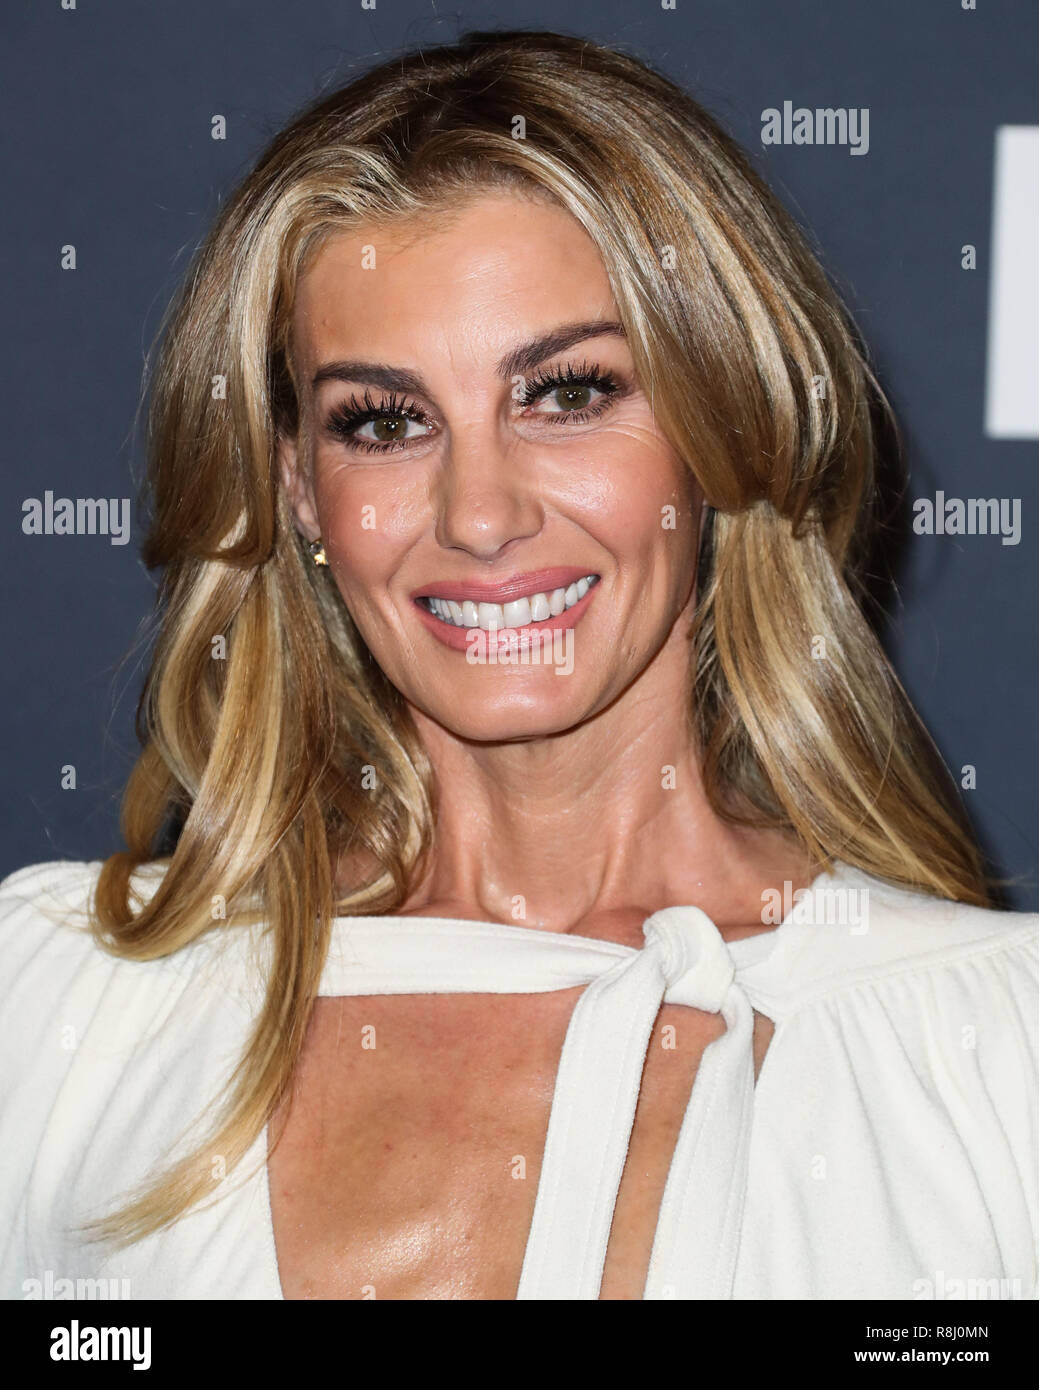 LOS ANGELES, CA, USA - OCTOBER 23: Faith Hill at the InStyle Awards 2017 held at the Getty Center on October 23, 2017 in Los Angeles, California, United States. (Photo by Xavier Collin/Image Press Agency) Stock Photo